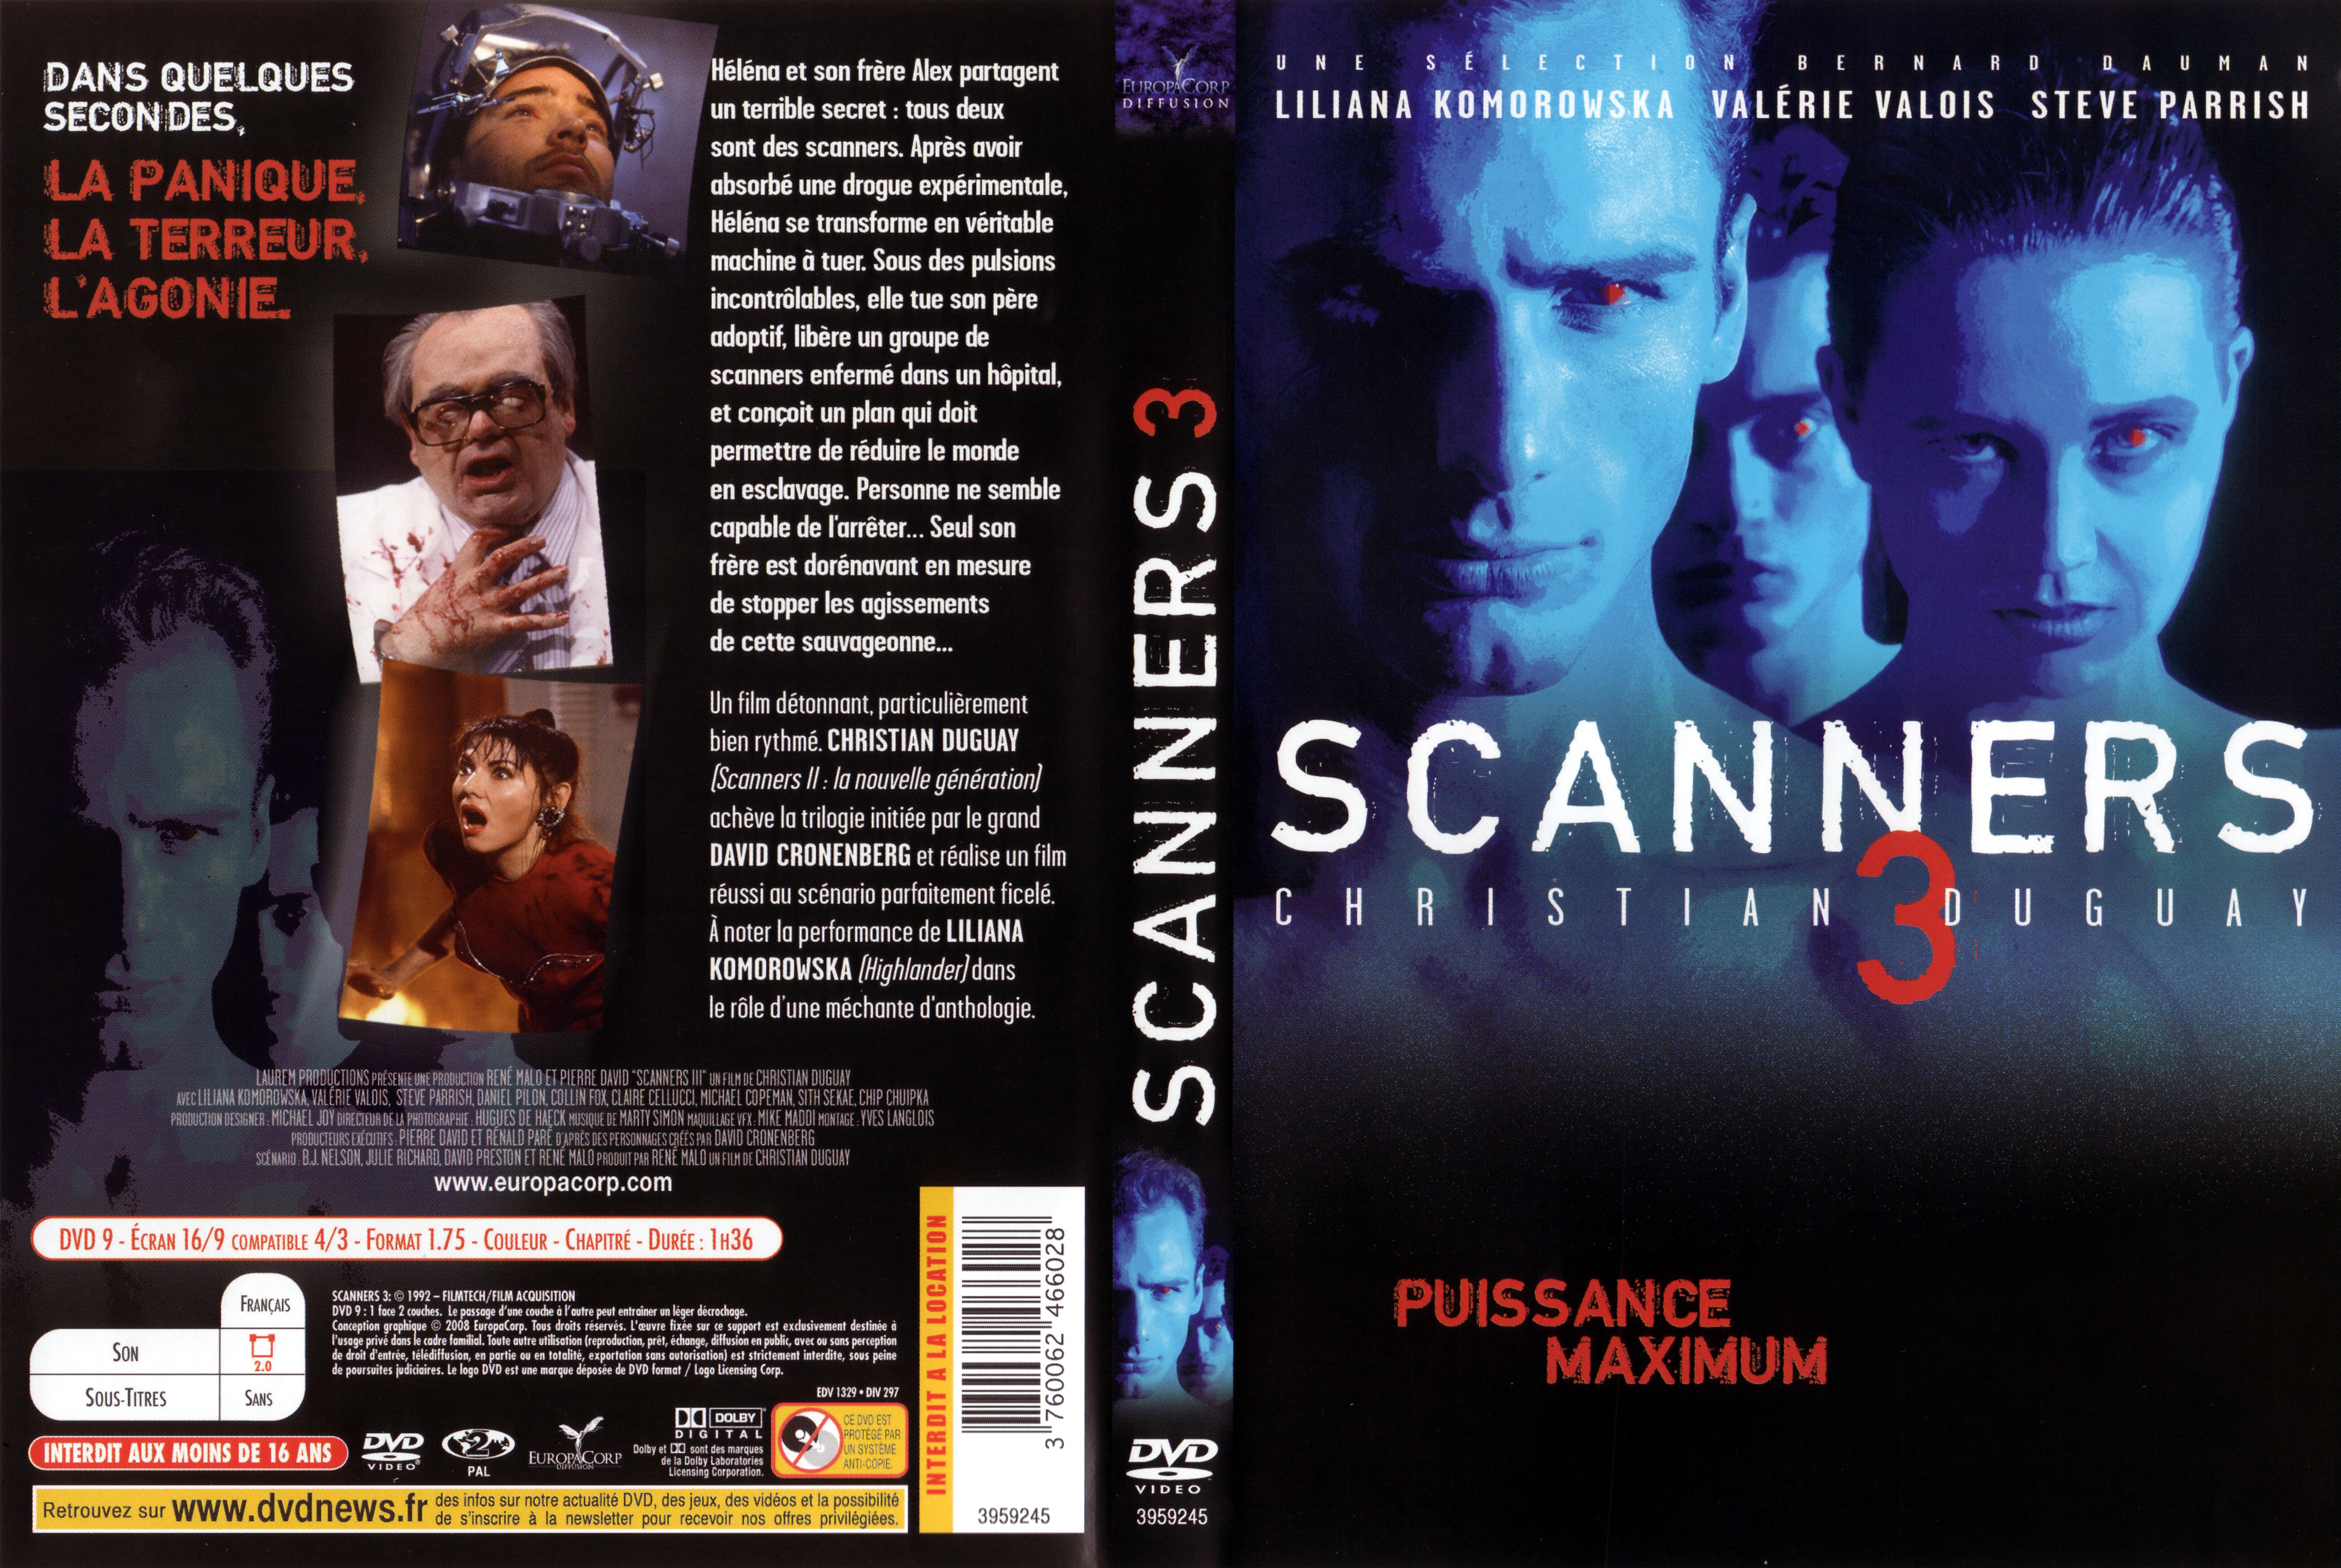 Jaquette DVD Scanners 3